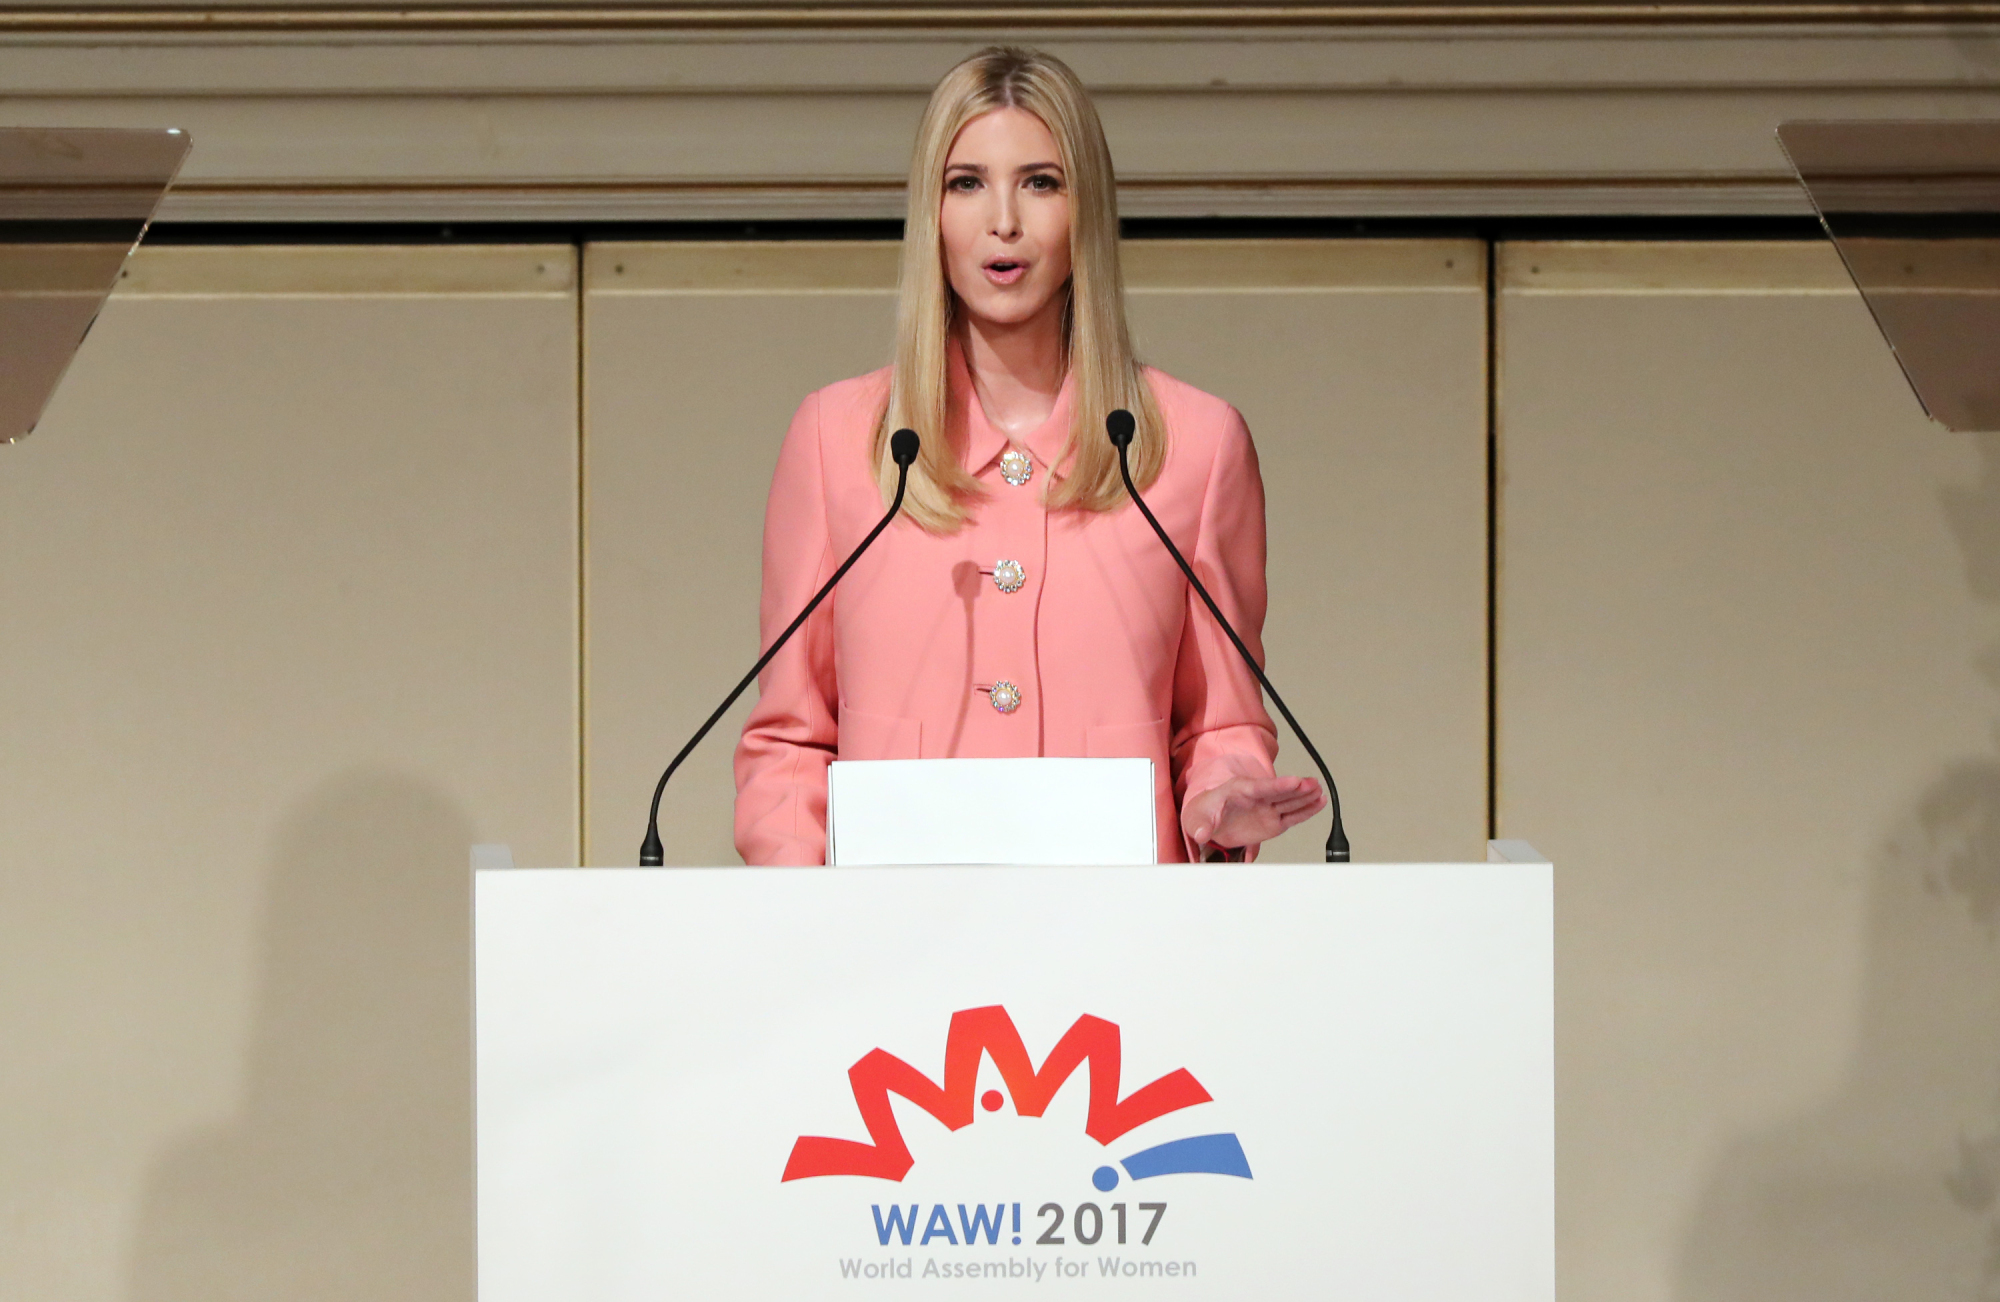 Ivanka Trump, adviser to and daughter of U.S. President Donald Trump, delivers a speech at the World Assembly for Women (WAW!) in Tokyo on Nov. 3. | AFP-JIJI